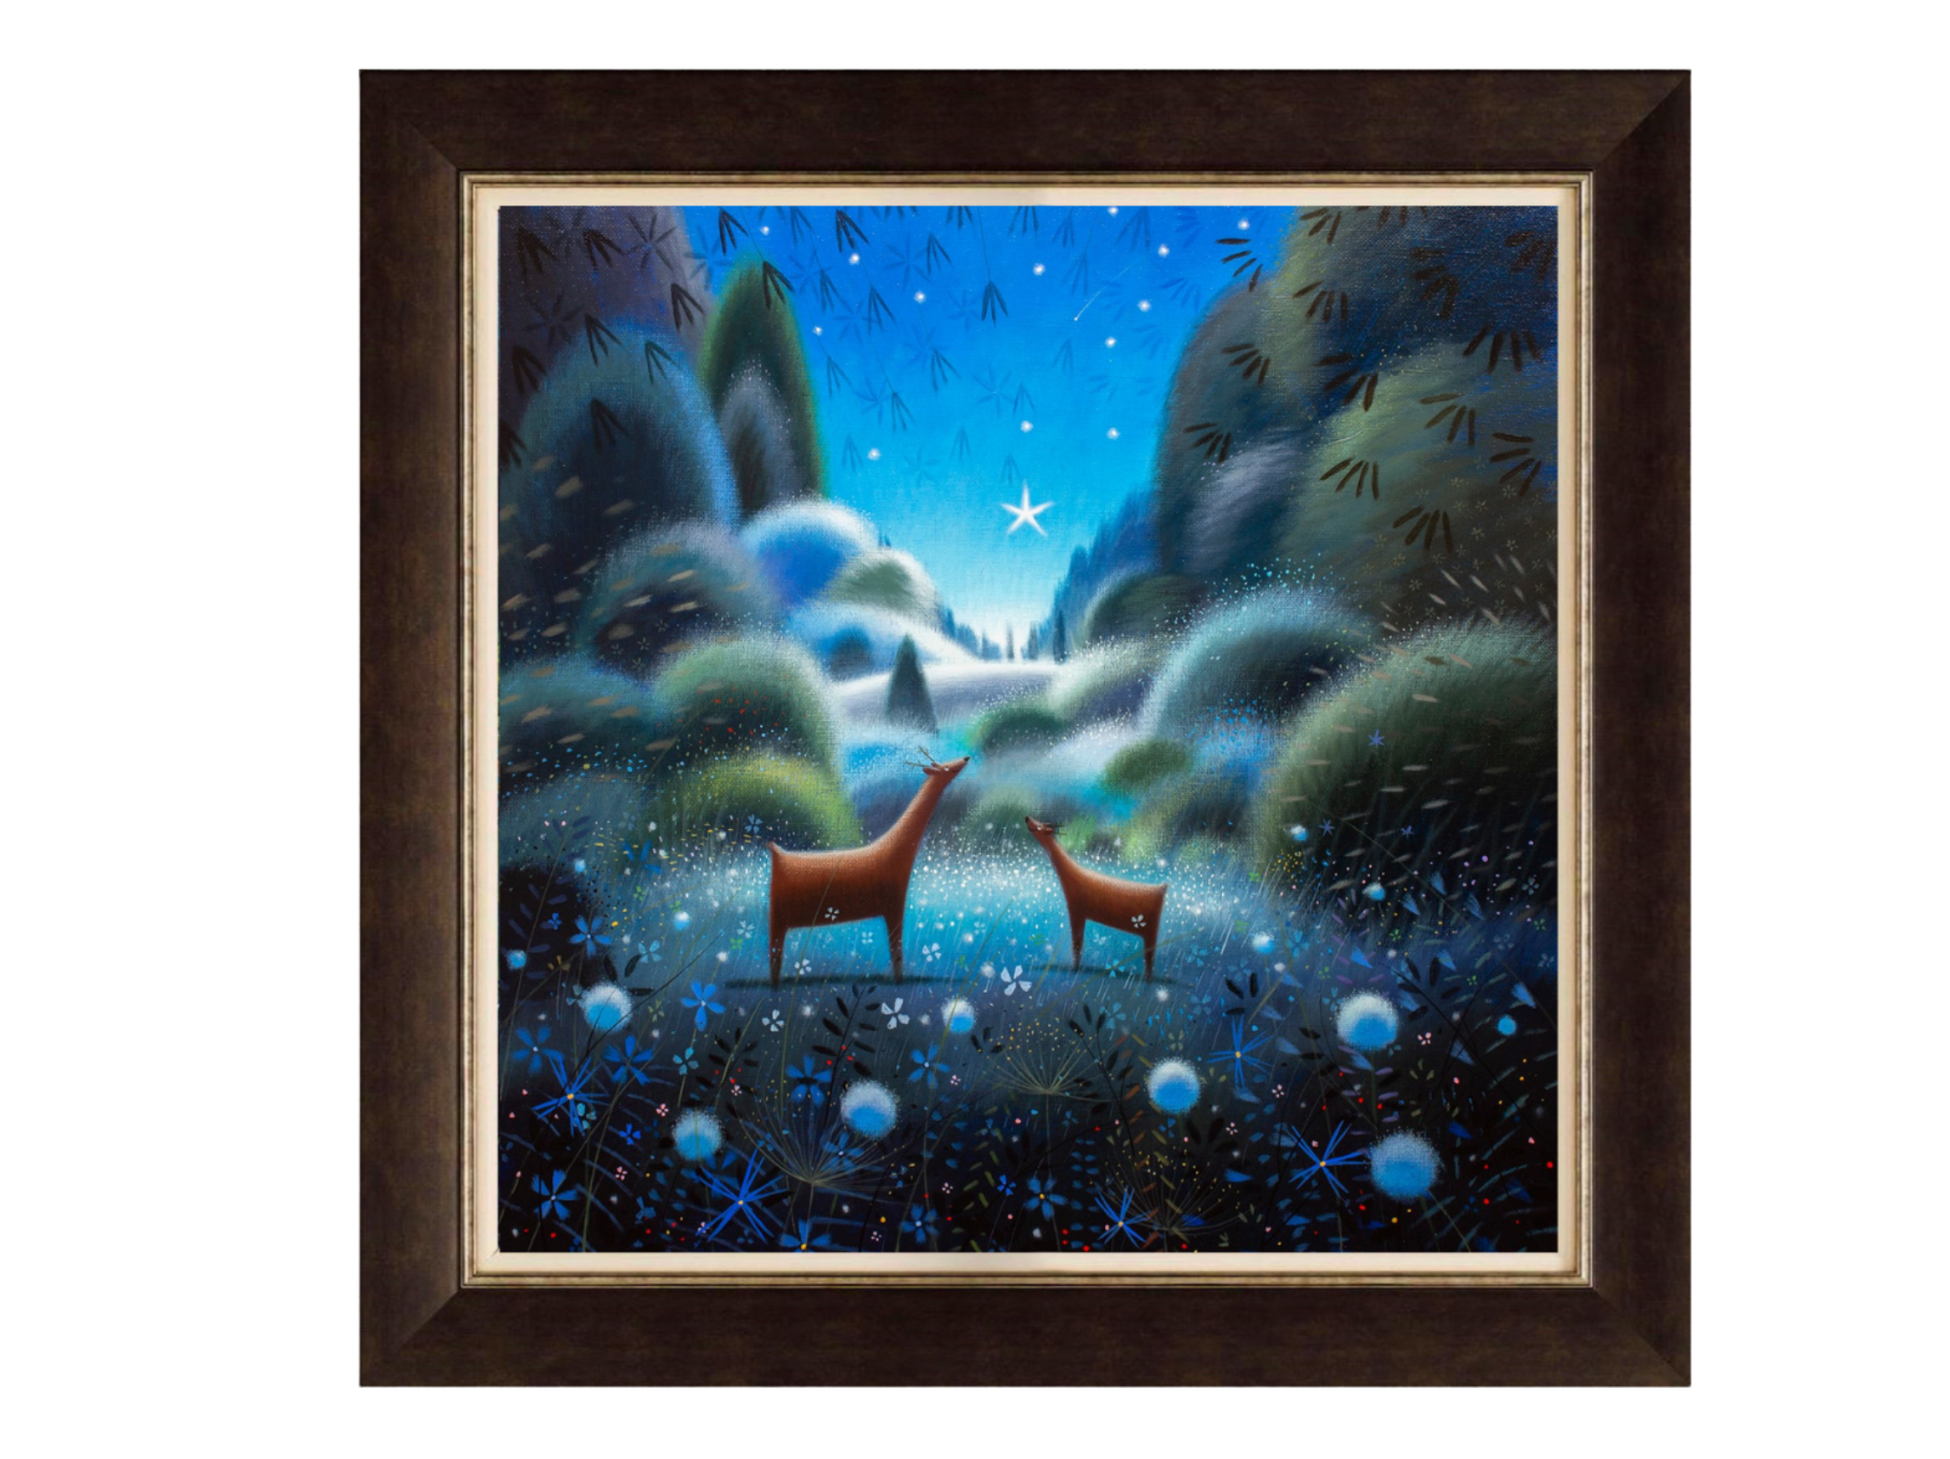 Ryder - 'Wish Upon A Star' - Framed Limited Edition Art